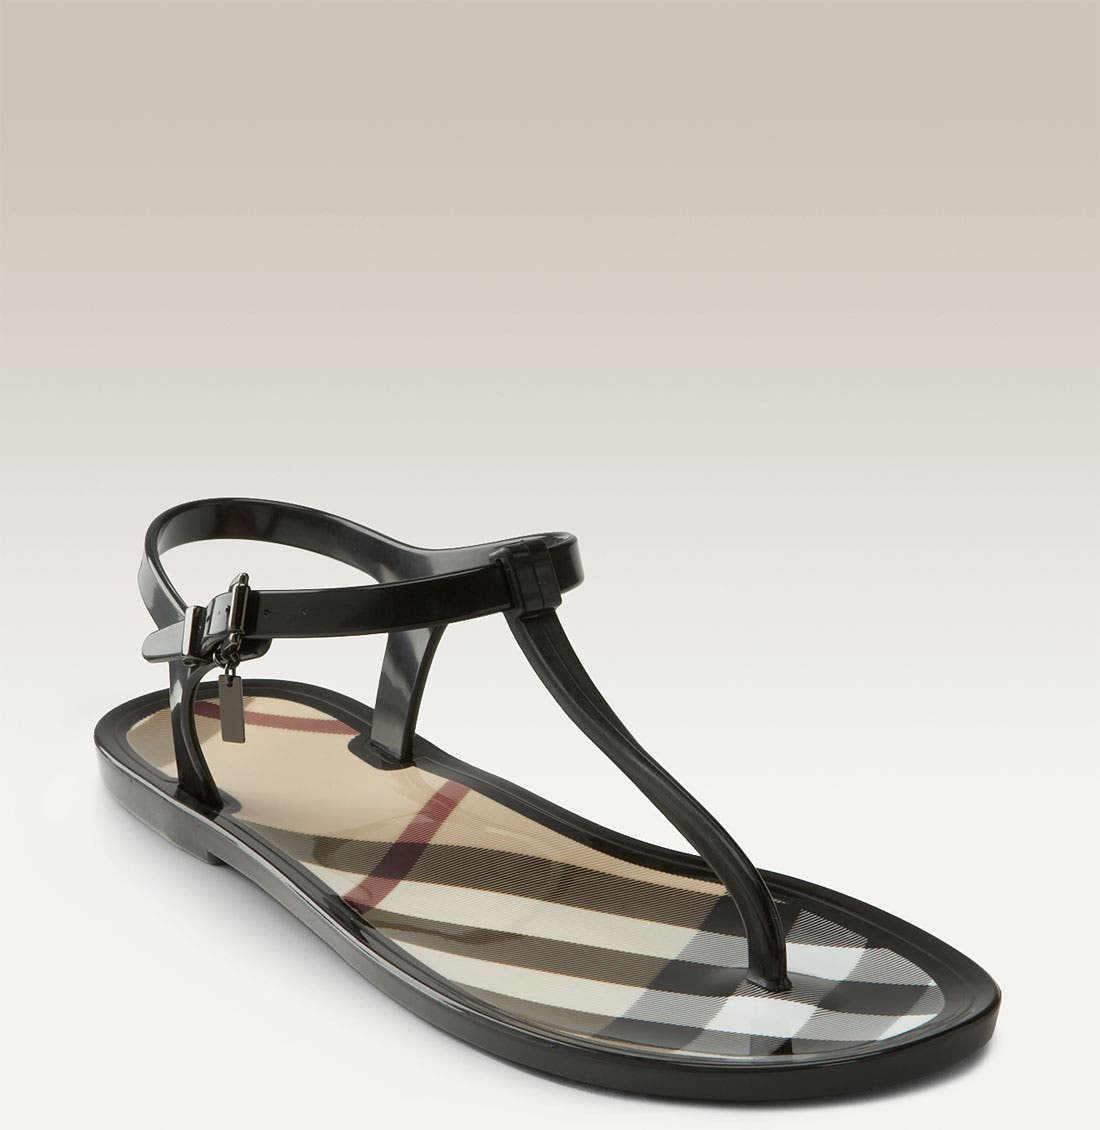 burberry jelly thong sandals